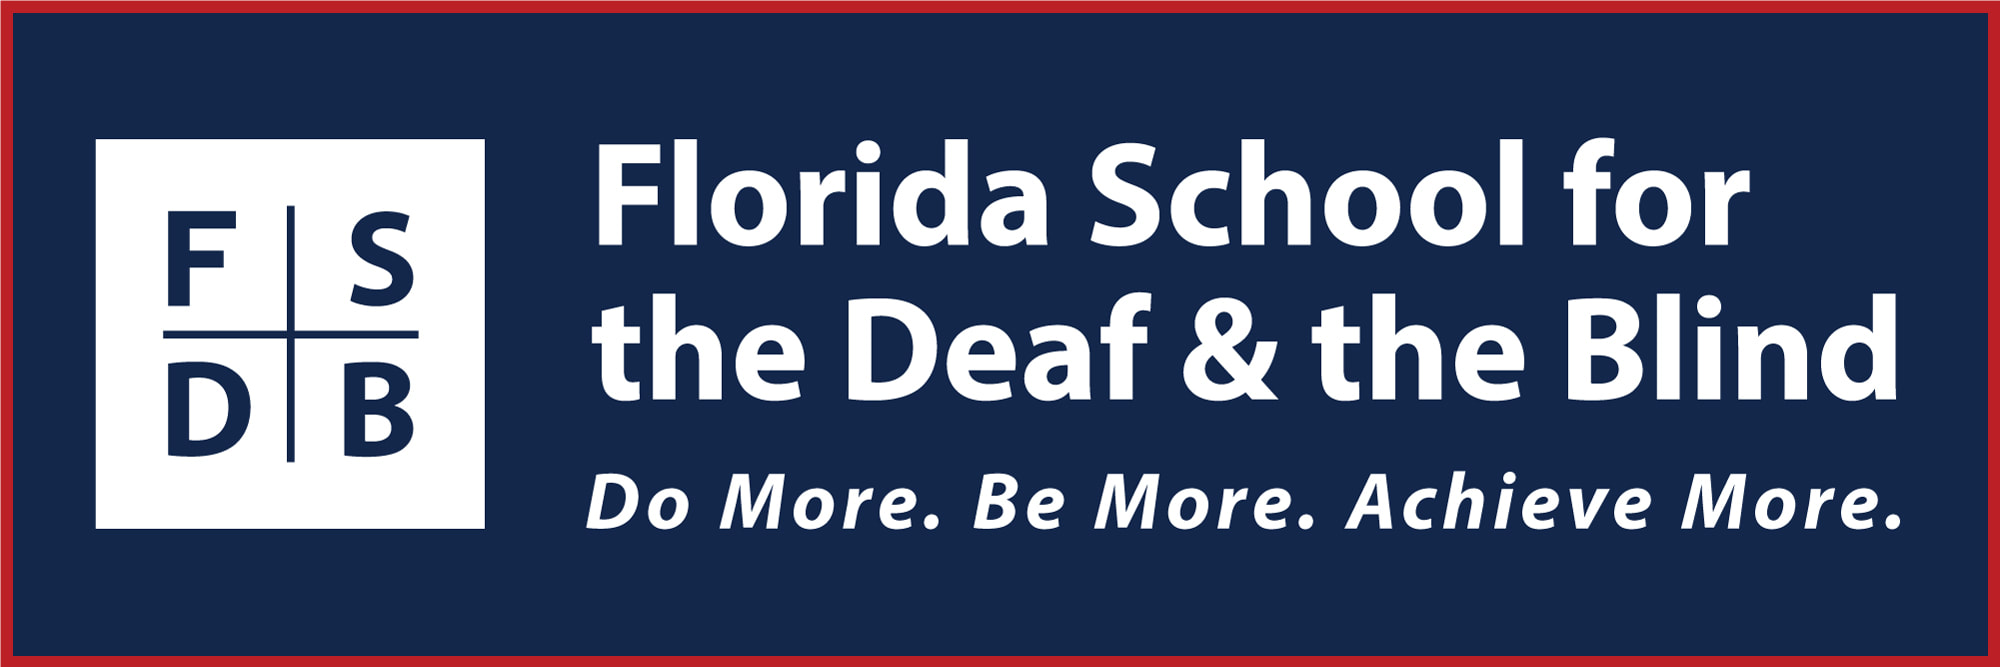 FLORIDA SCHOOL FOR THE DEAF AND THE BLIND